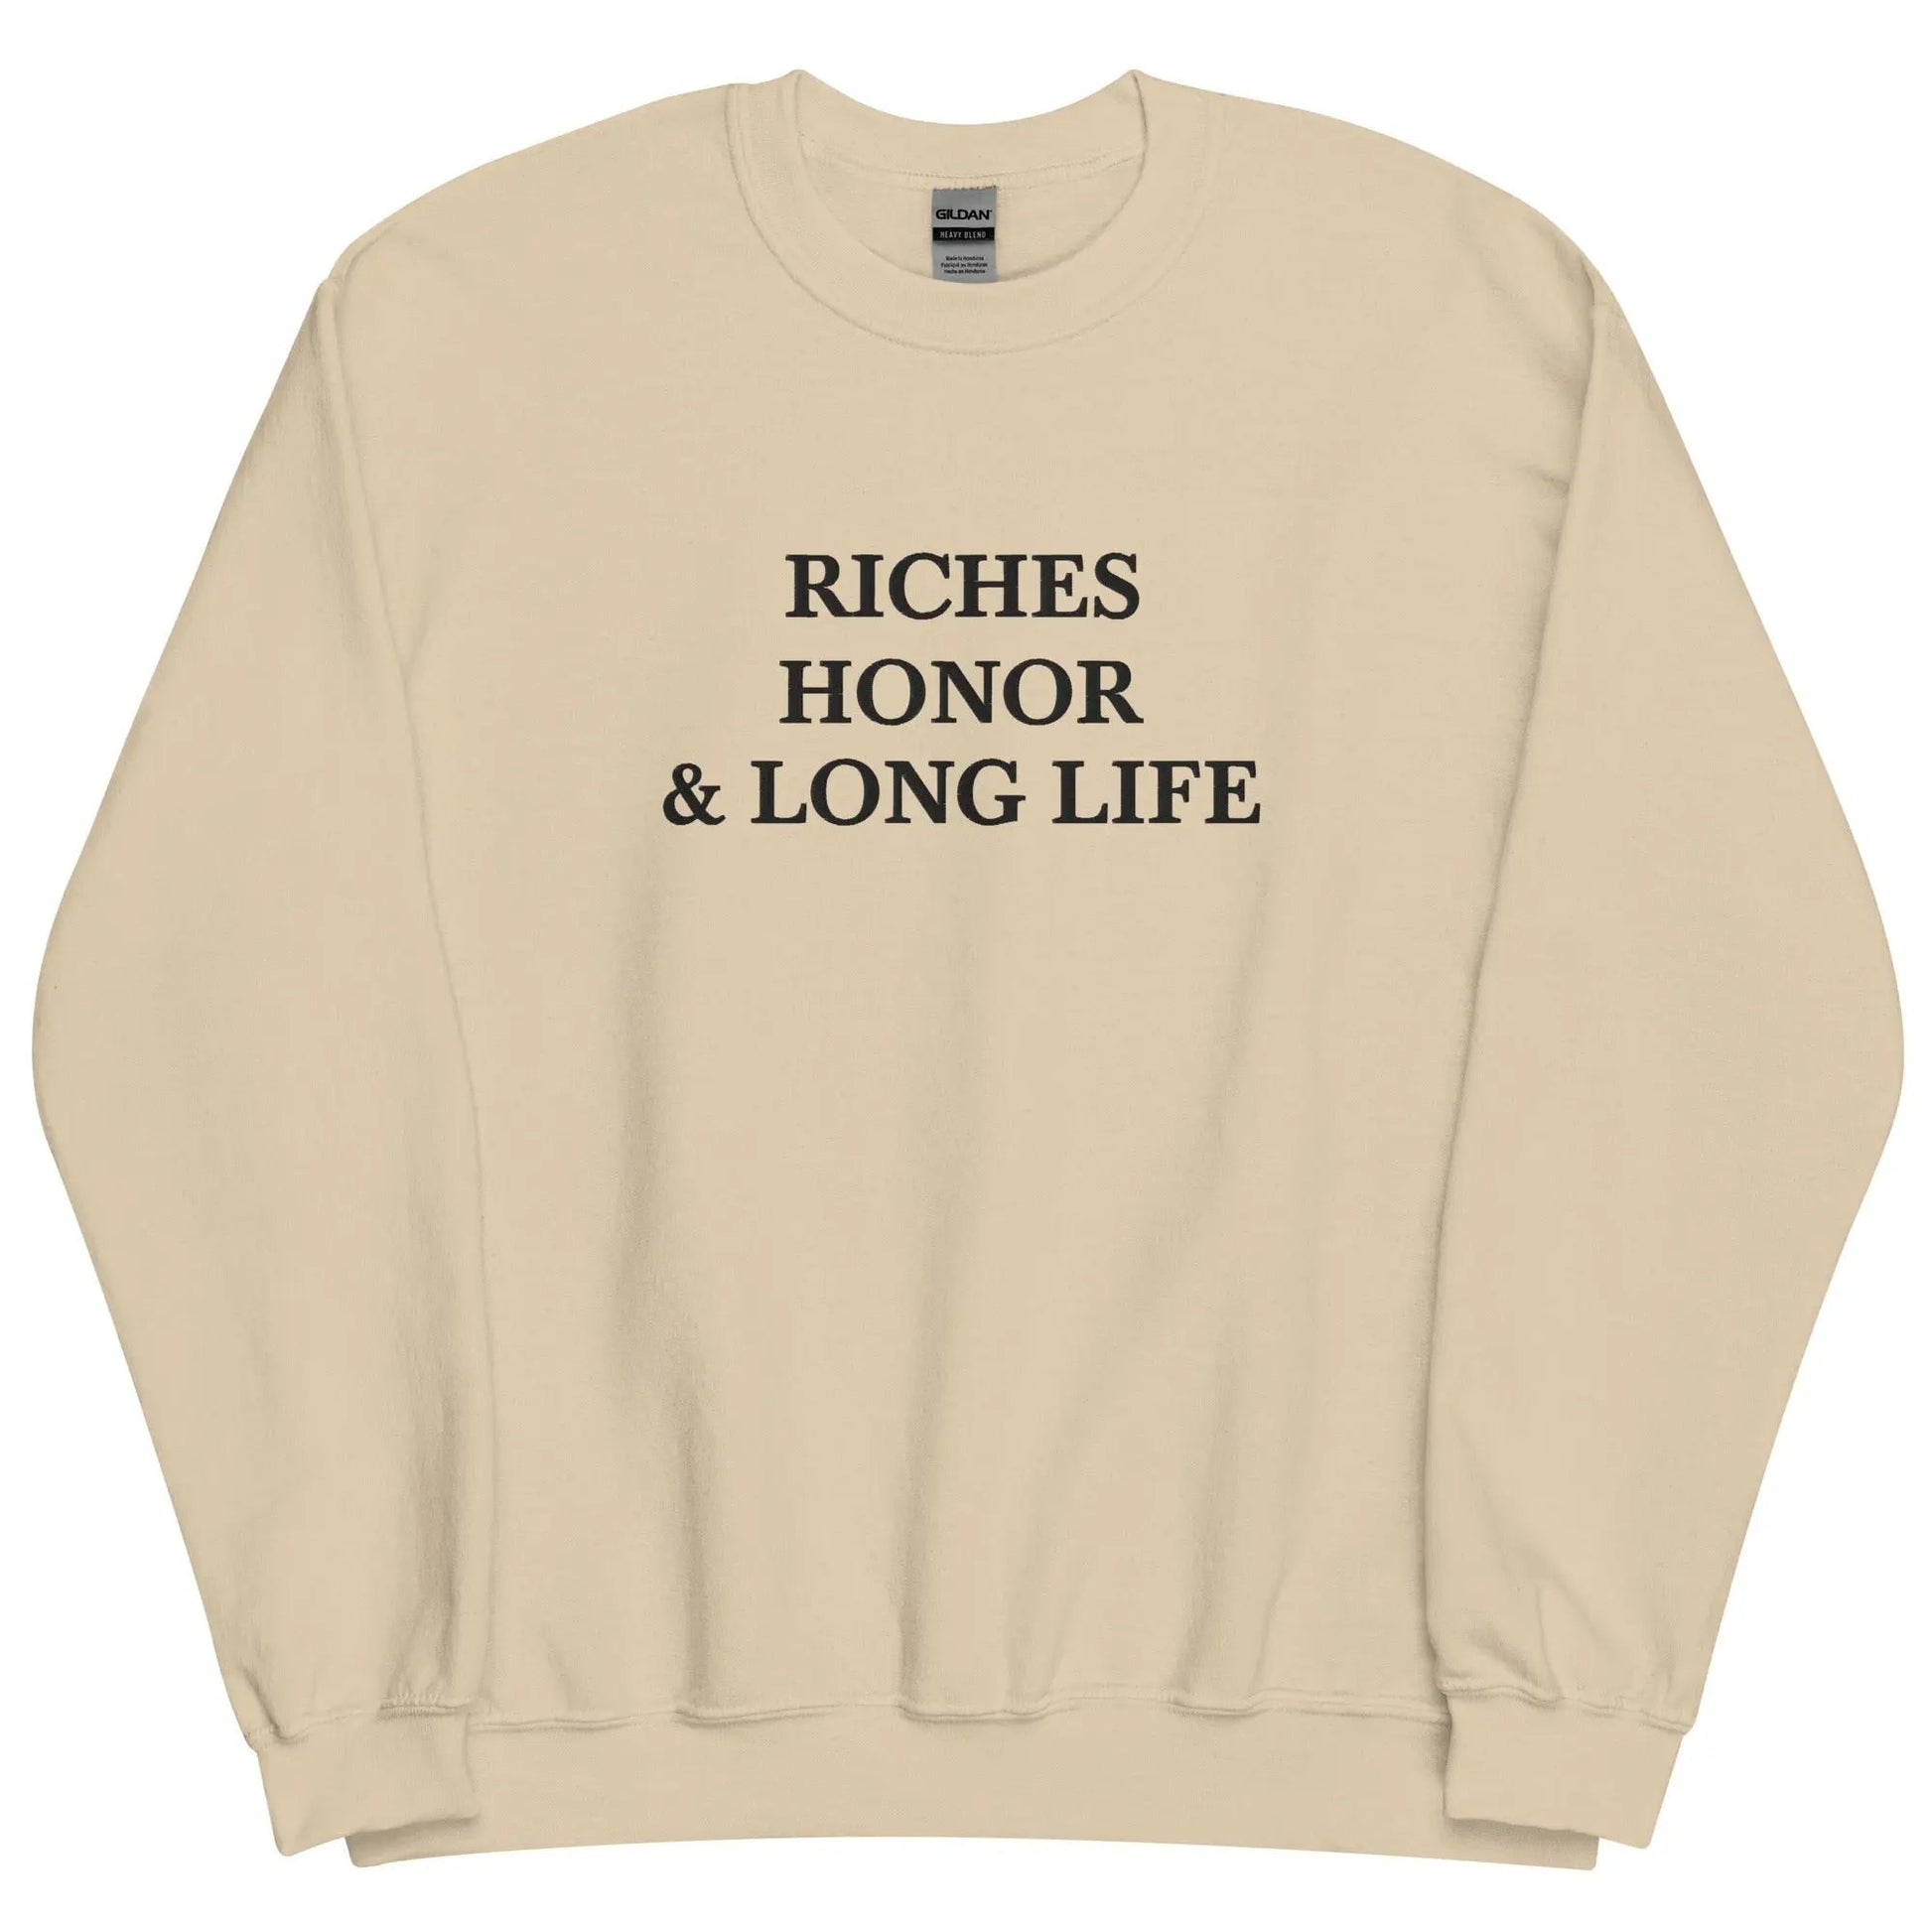 Embroidered Riches Honor & Long Life Crewneck Sweatshirt-clothes- sweater-Sand-S-mysticalcherry